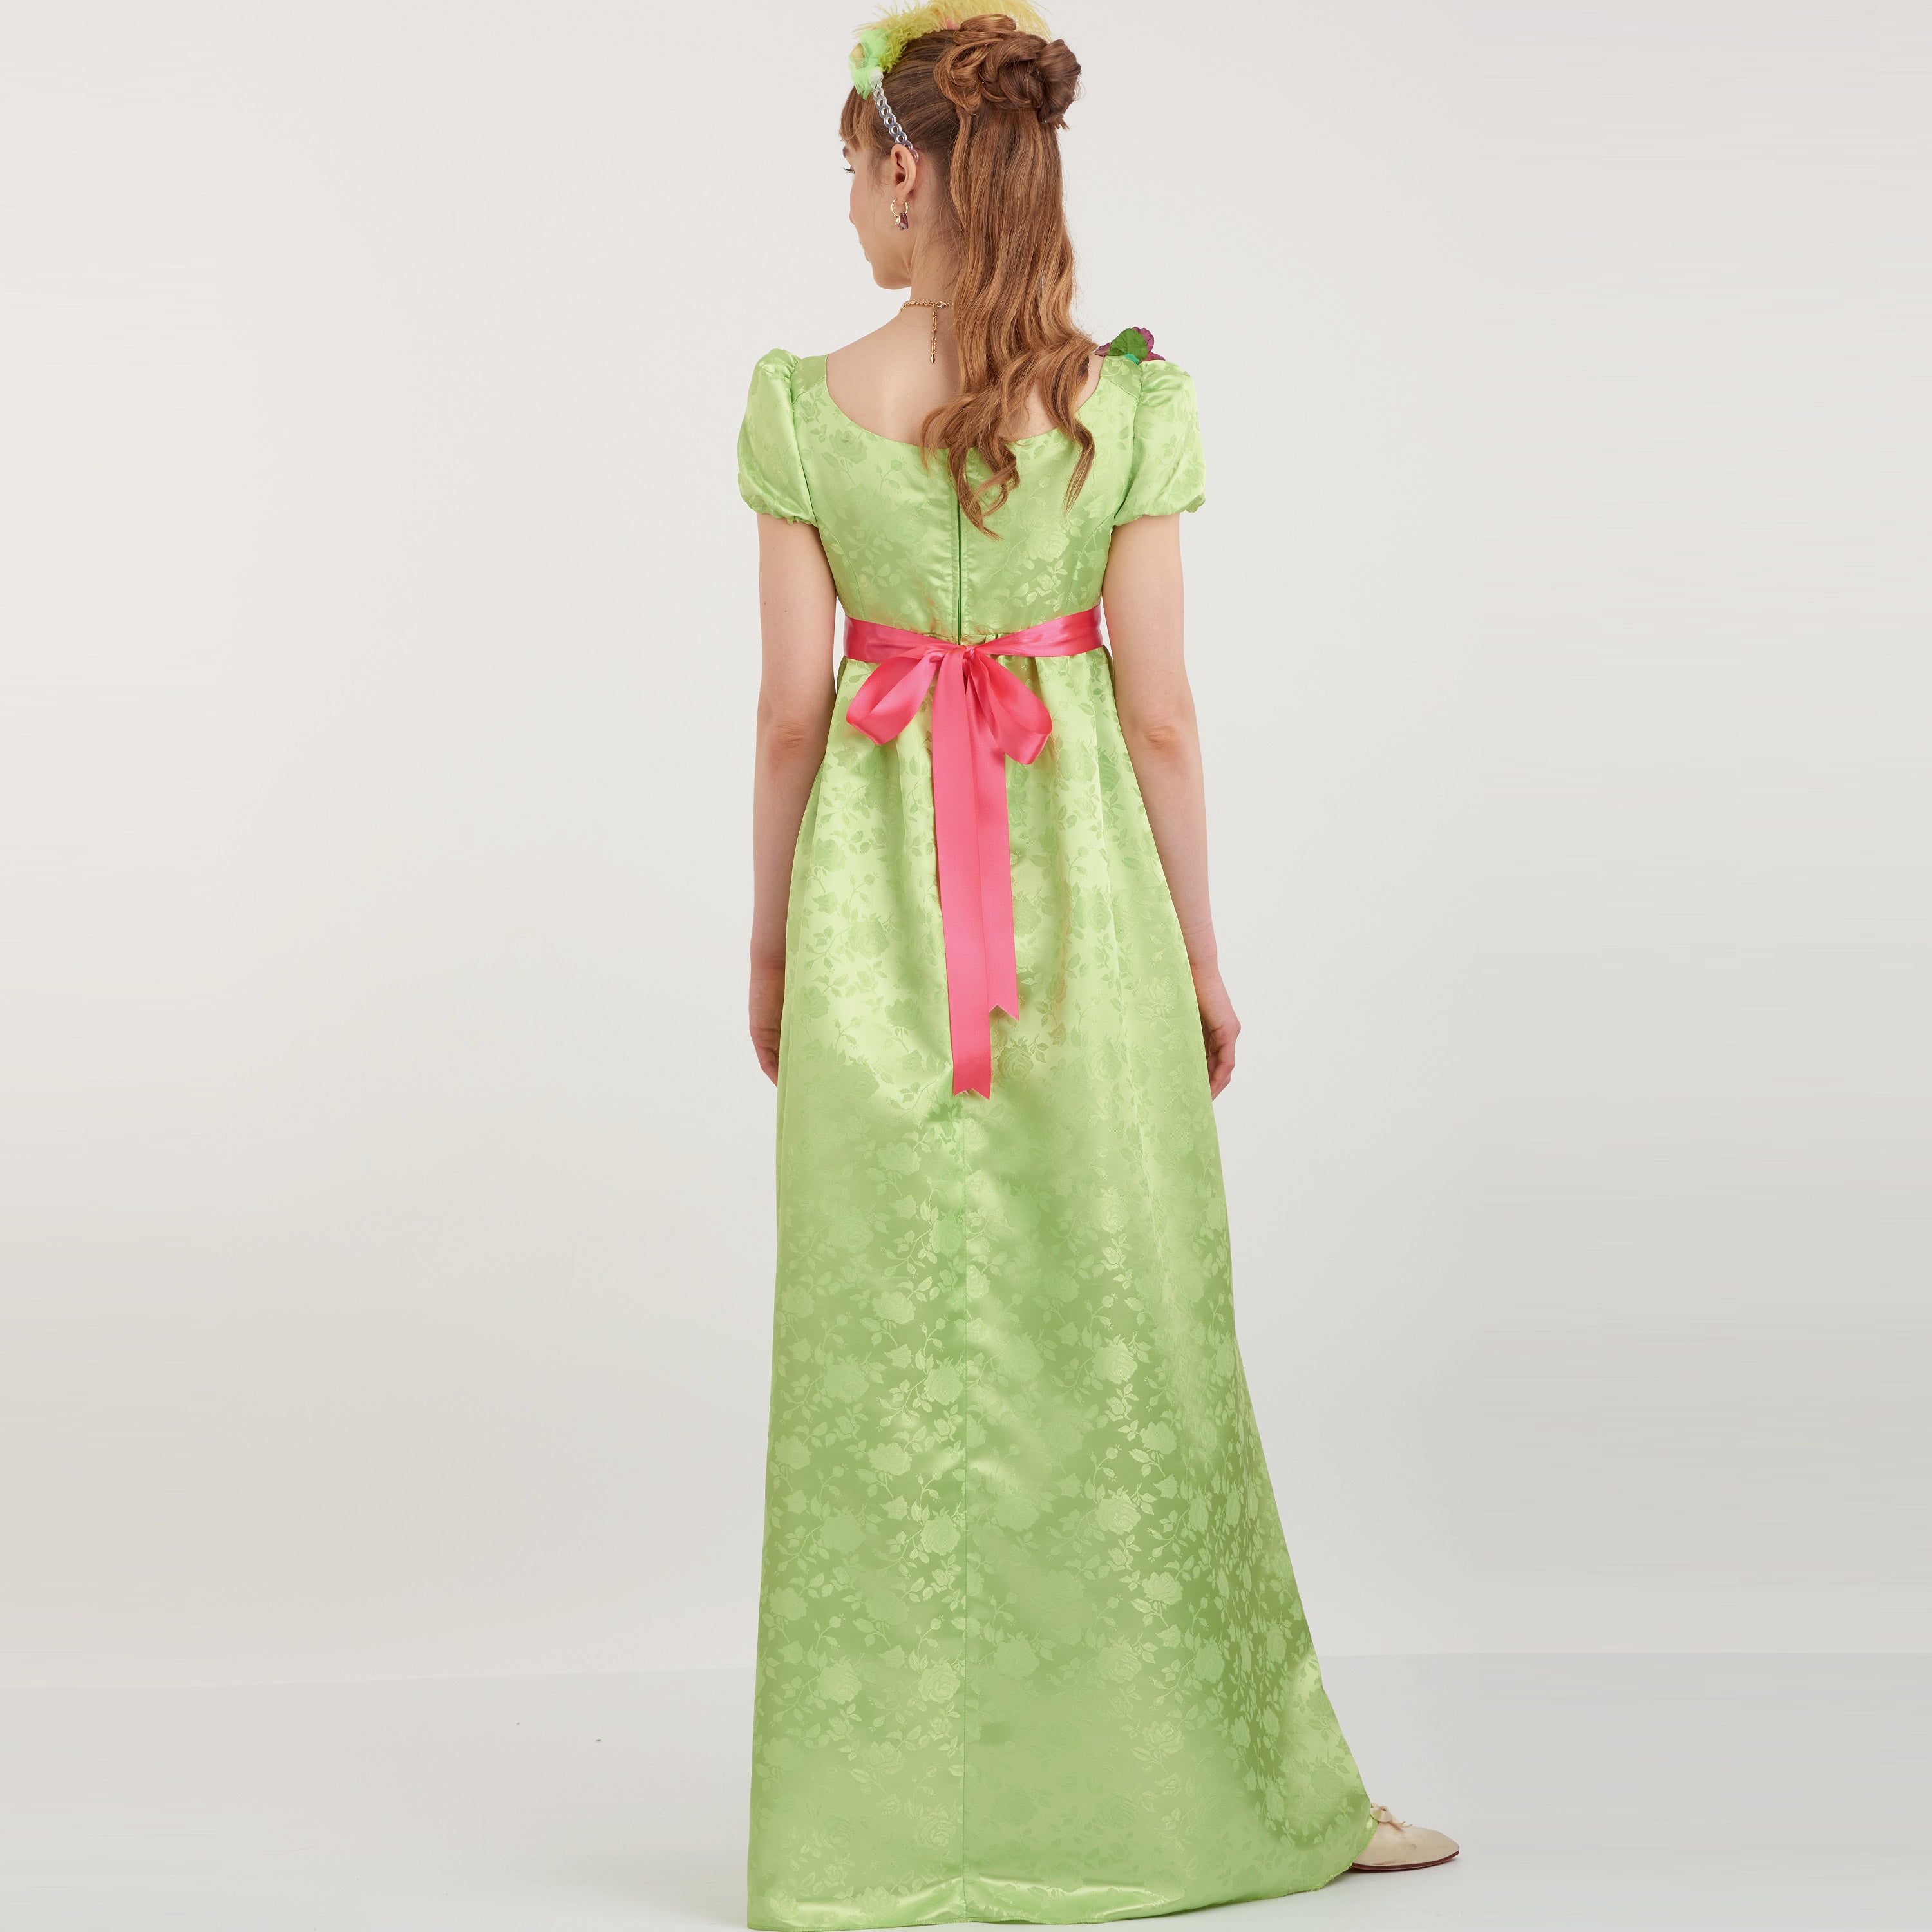 Simplicity Pattern 9434 Misses' and Women's Regency Era Dresses from Jaycotts Sewing Supplies